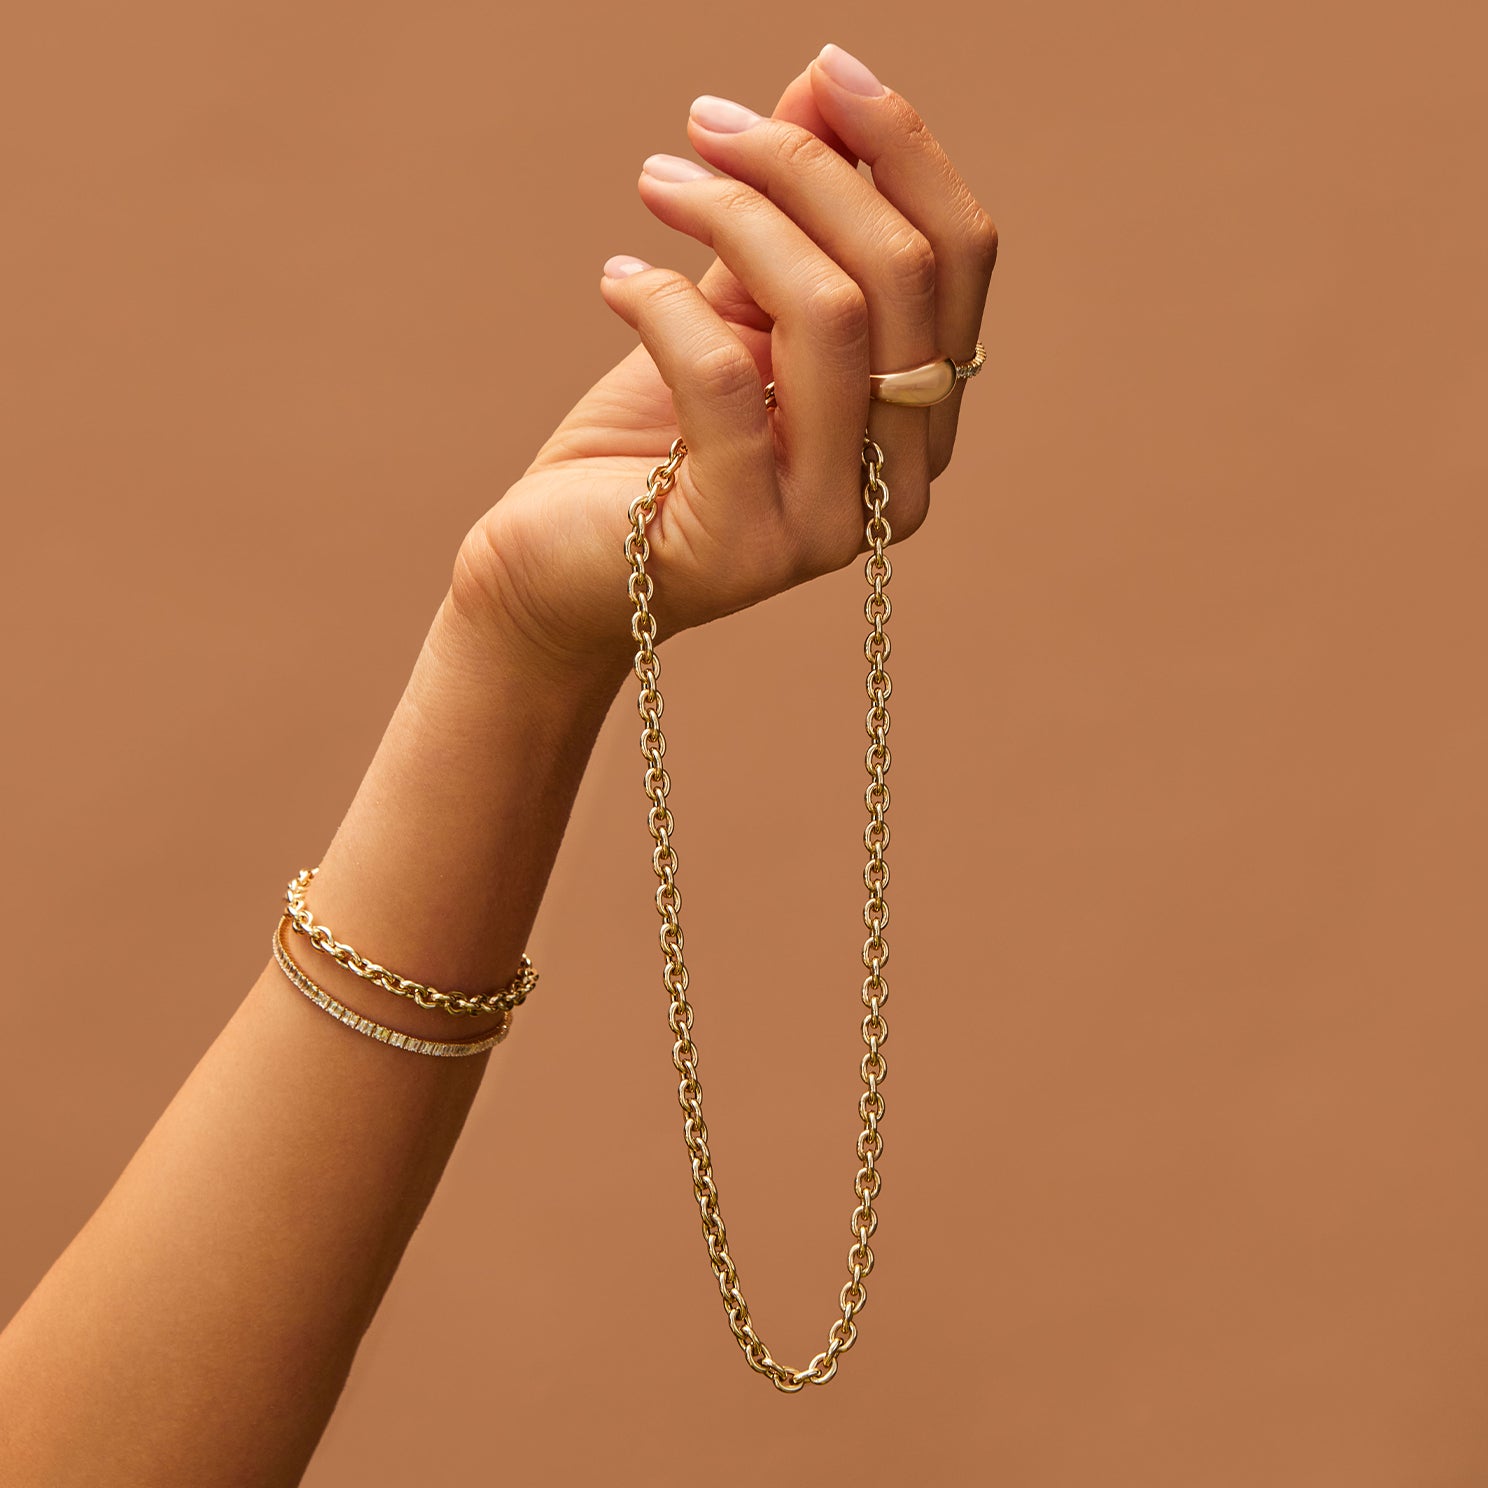 Sienna Chain Necklace in 14k yellow gold held in hand of model wearing two gold bracelets and two gold rings